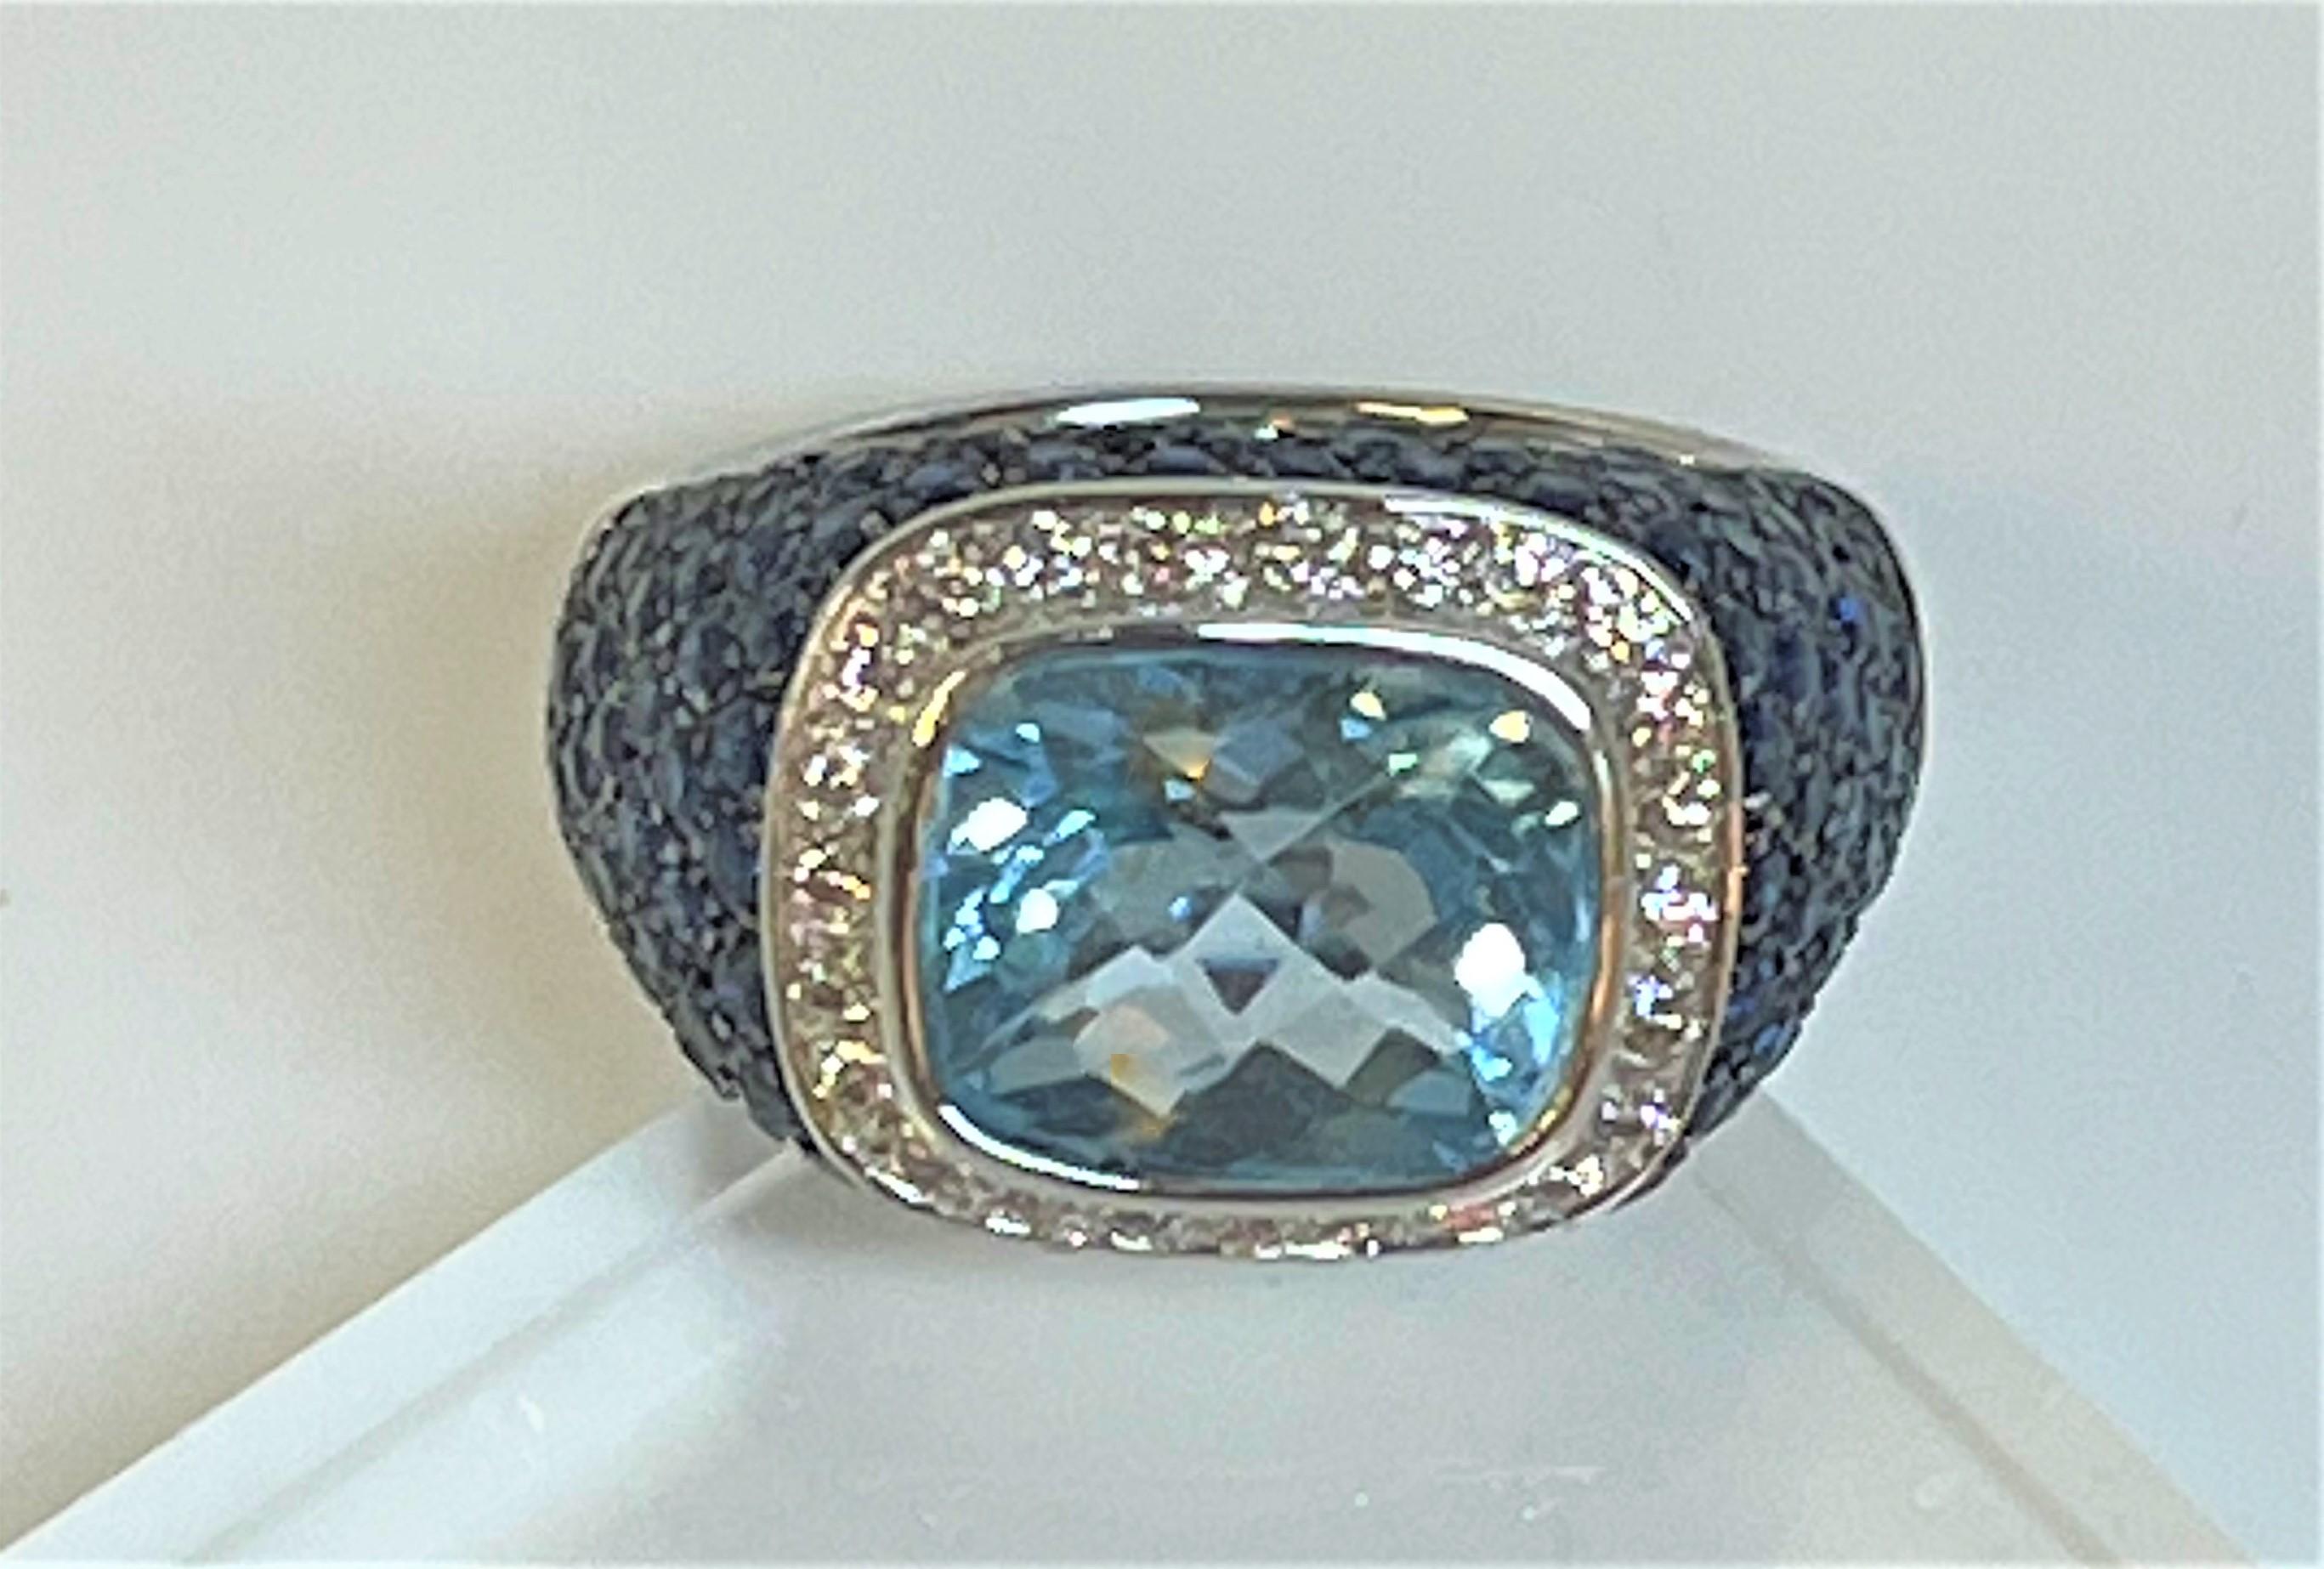 This is a beautiful statement piece!  
18 karat white gold 
Center is a beautiful light blue topaz, approximately 12.5mm x 10mm x 7mm (approximately 6.8 carats).
Center topaz is surrounded by 28 total round diamonds, approximately .02ct each.
Pave